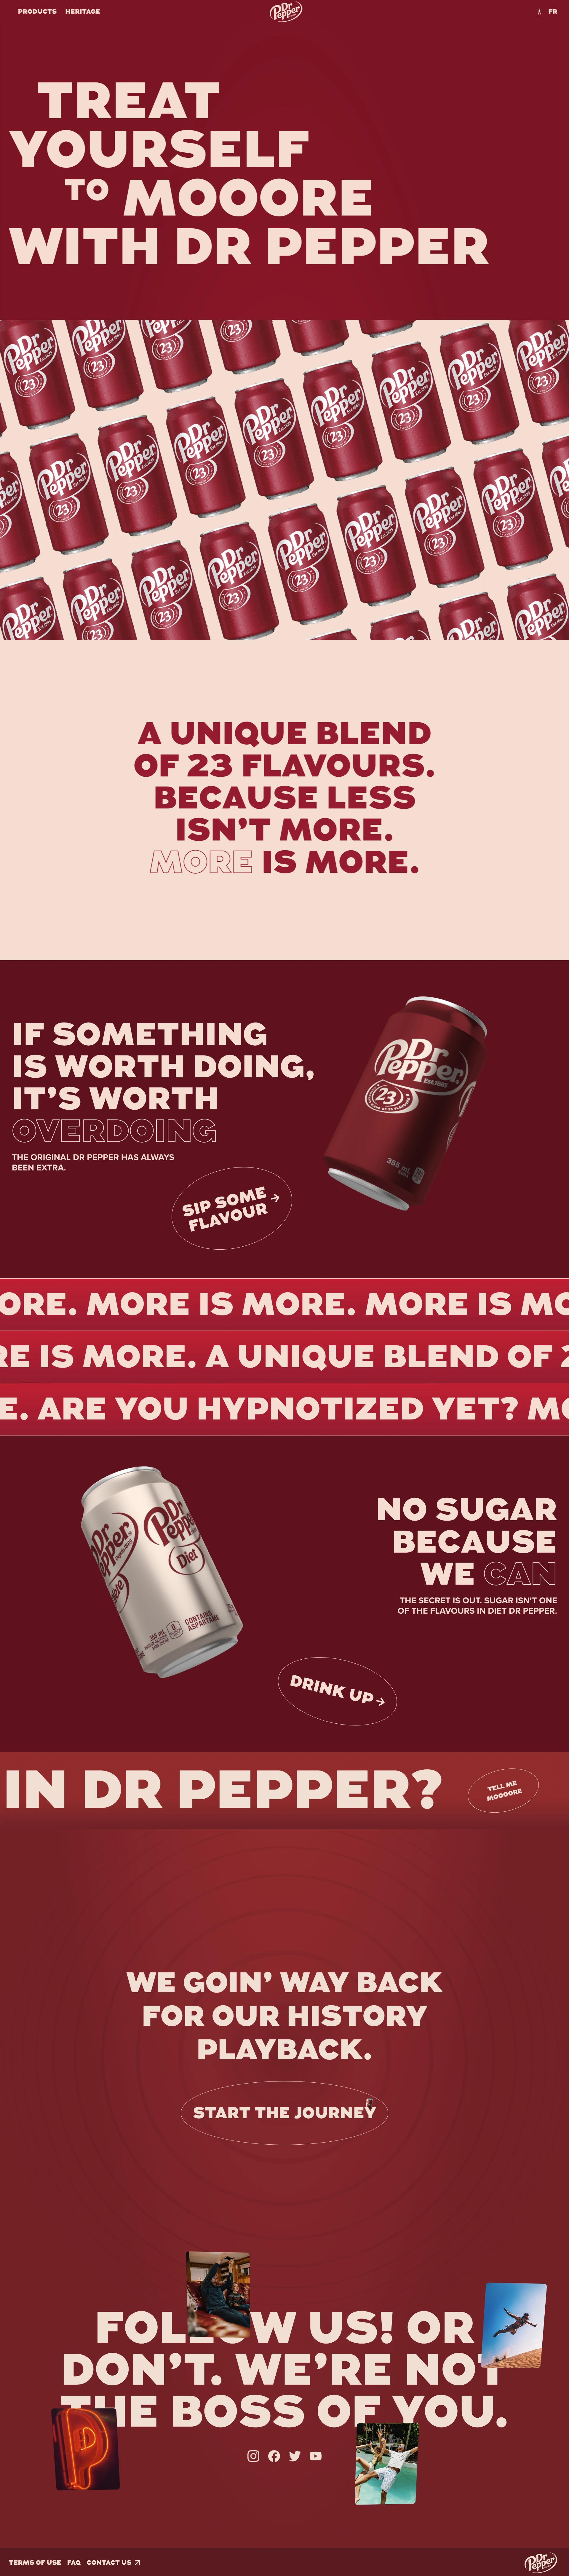 Dr Pepper Landing Page Example: Explore the world of Dr Pepper flavours. A unique drink with a complex taste of 23 flavours to satisfy your craving for freshness.